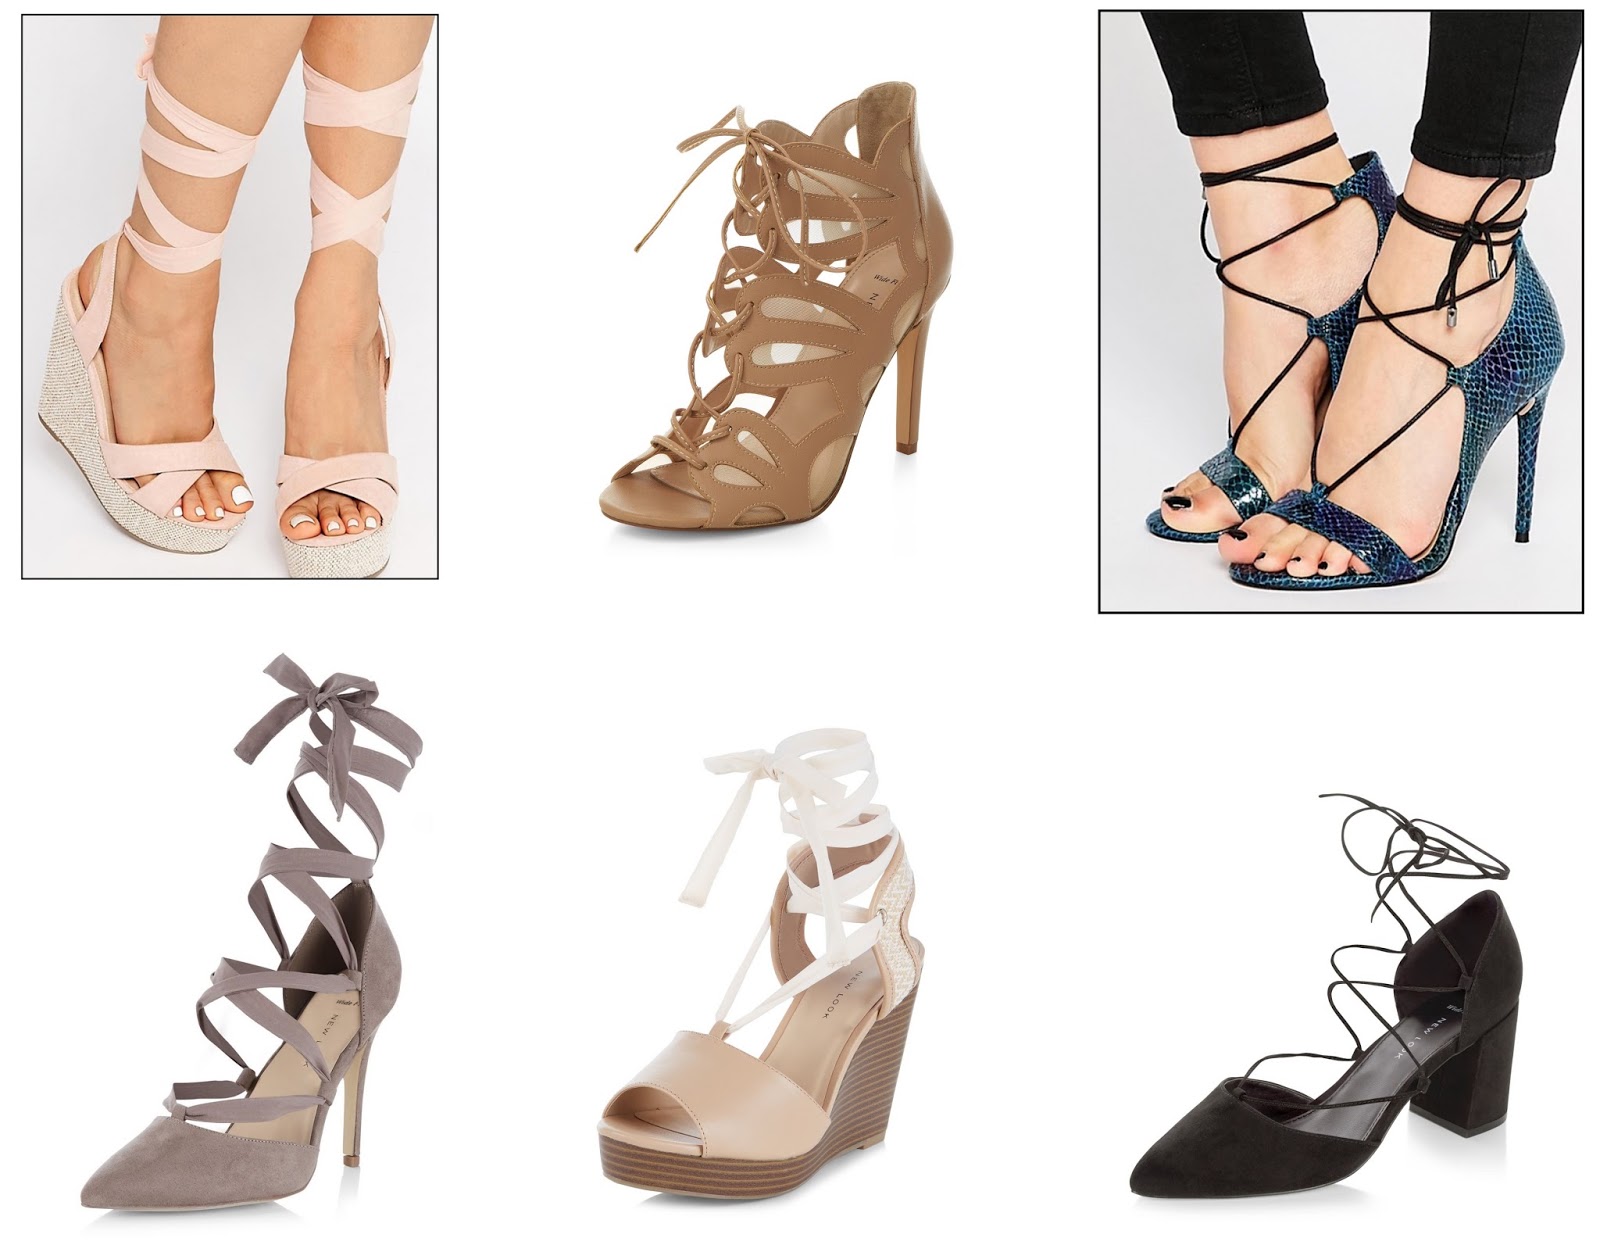 18 Lace Up Shoe Styles For Spring/ Summer